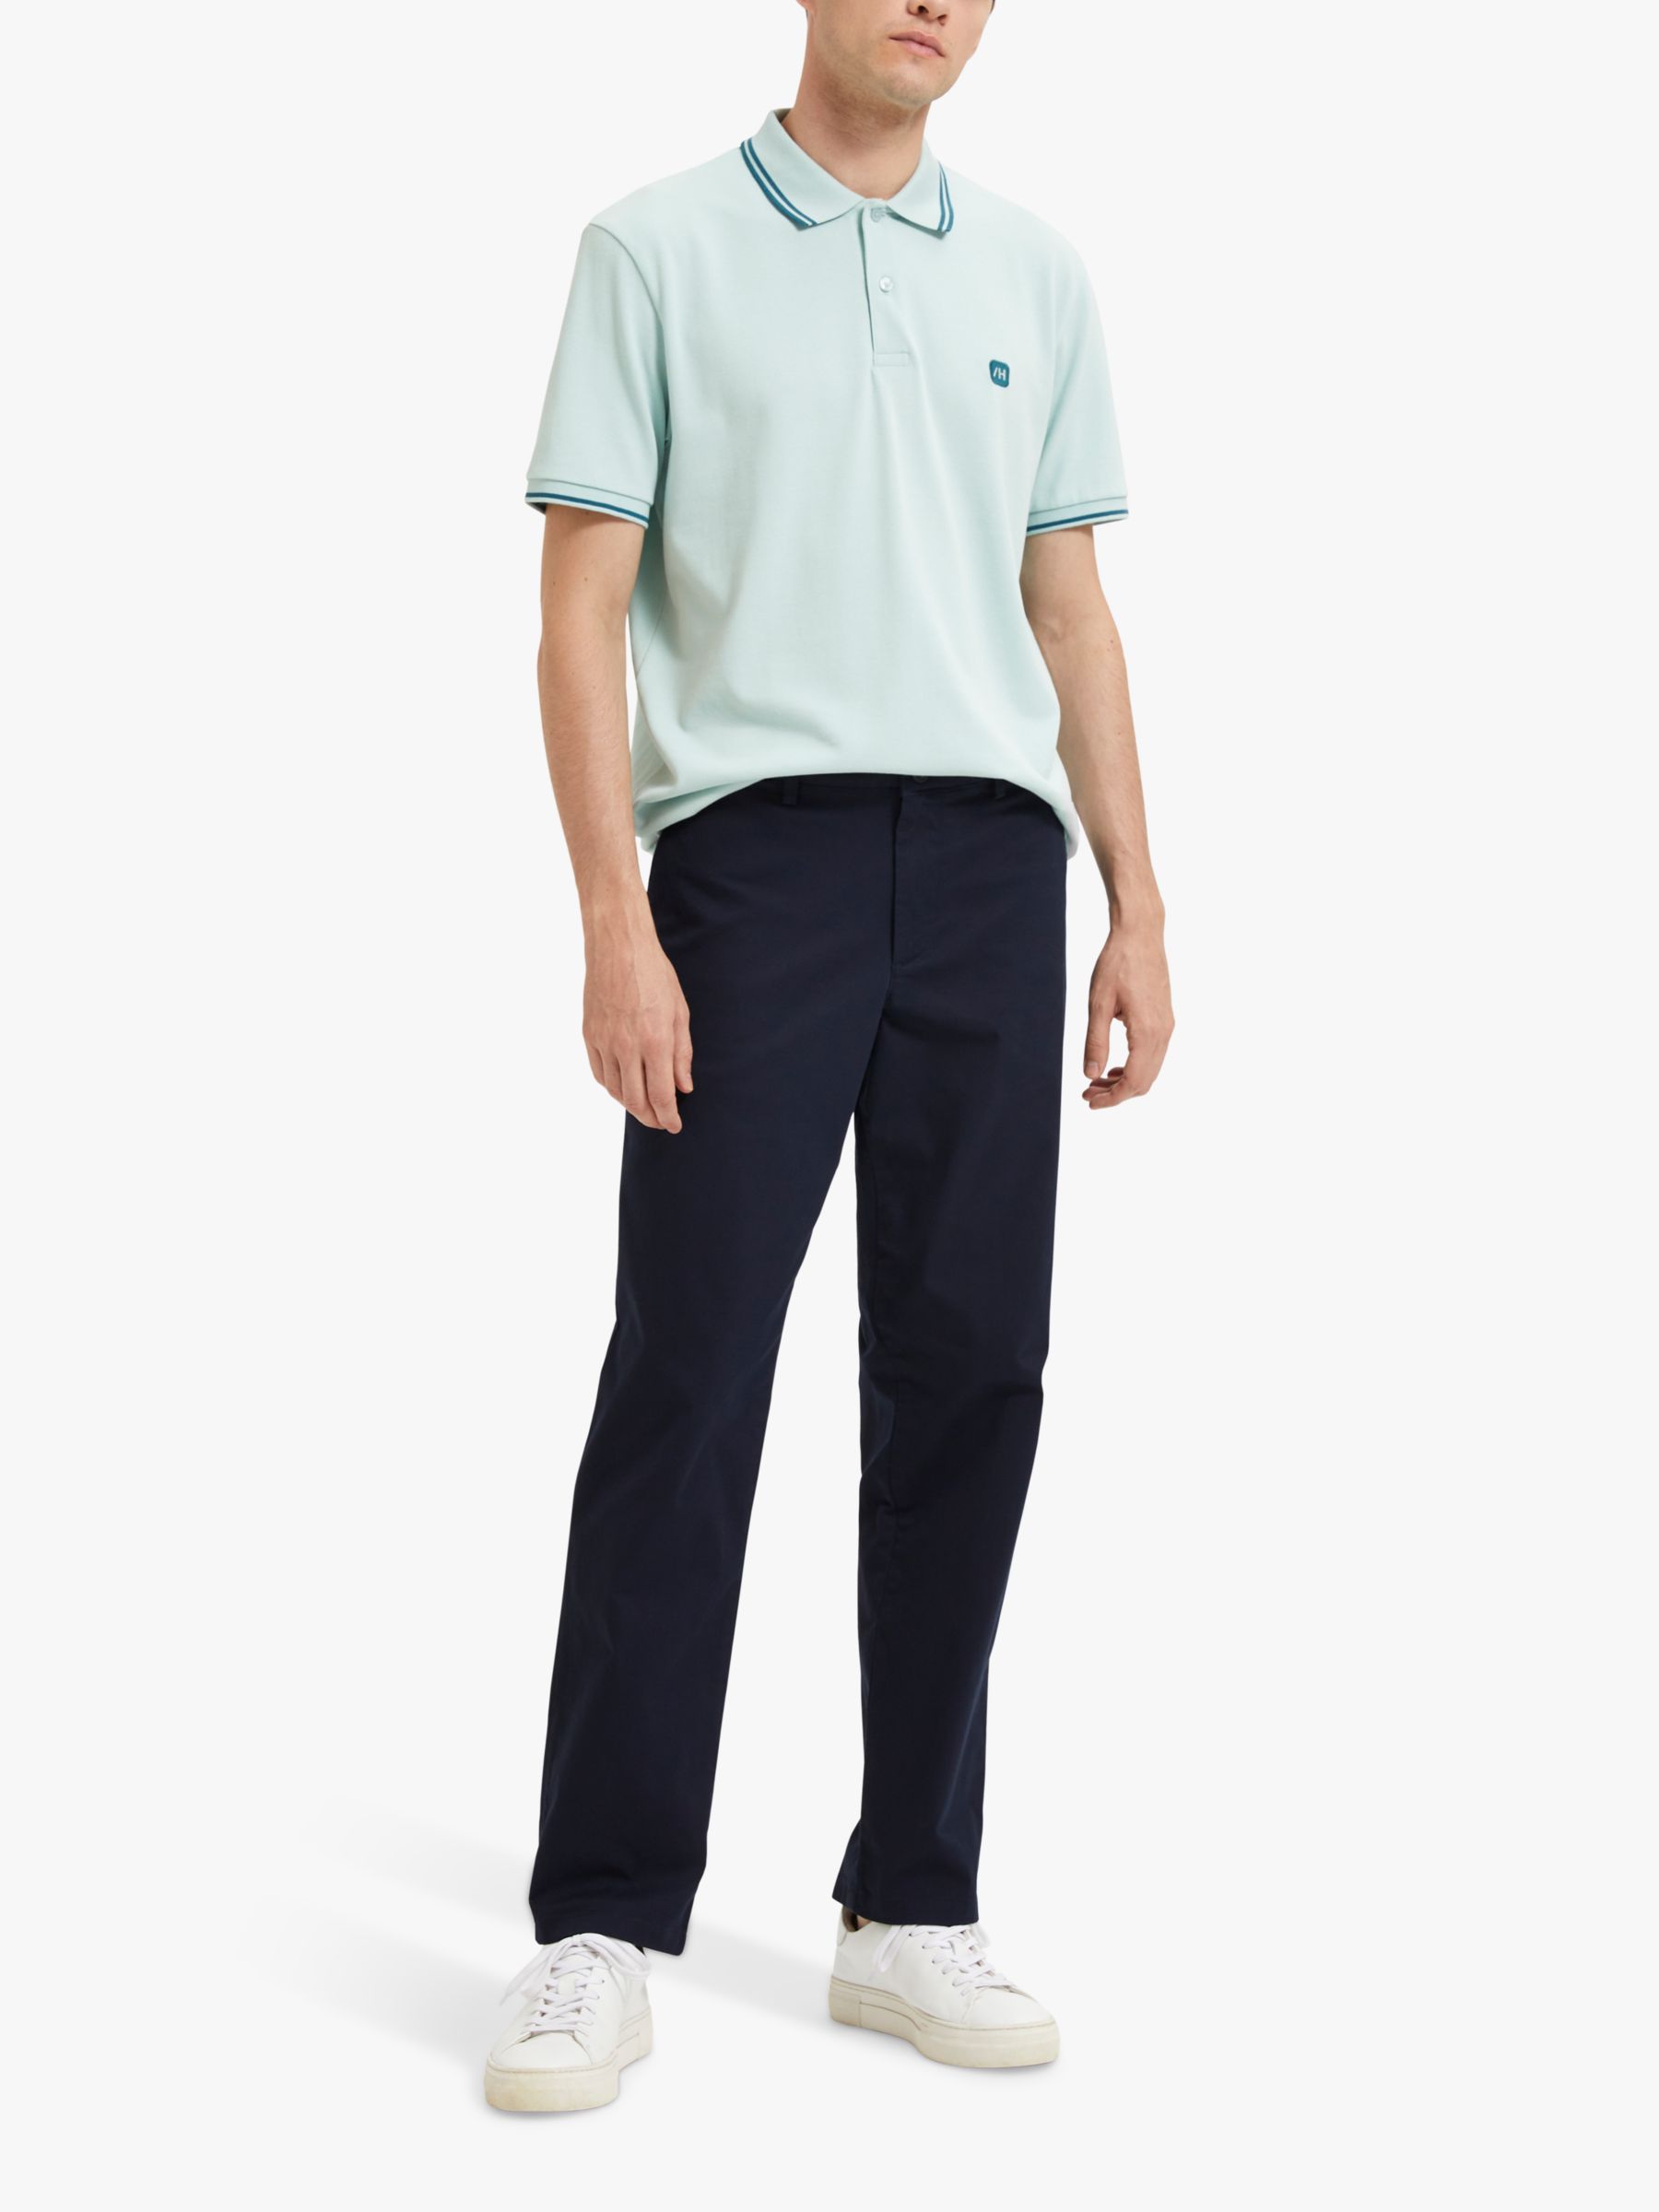 SELECTED HOMME Chino Trousers, Dark Sapphire at John Lewis & Partners